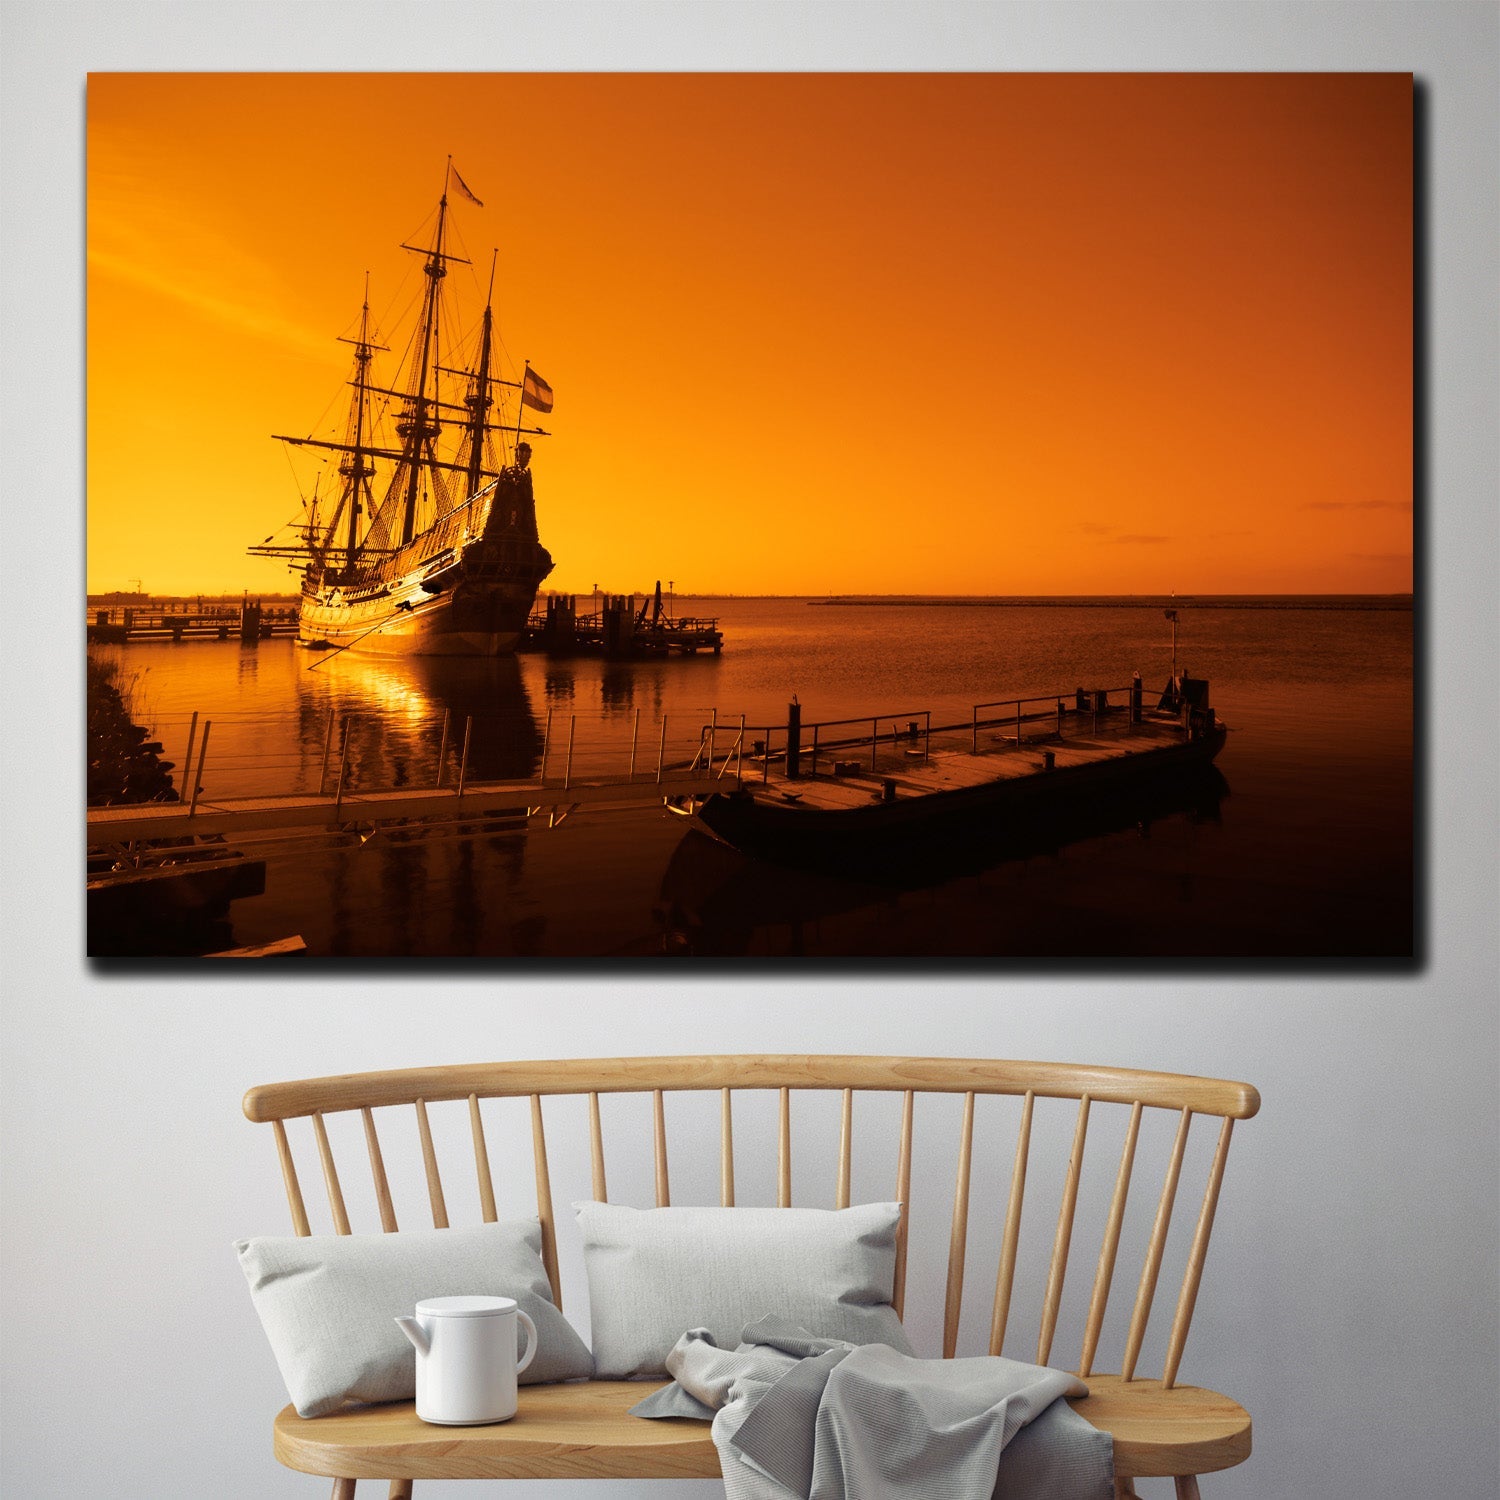 https://cdn.shopify.com/s/files/1/0387/9986/8044/products/ShipintheQuayCanvasArtprintStretched-4.jpg